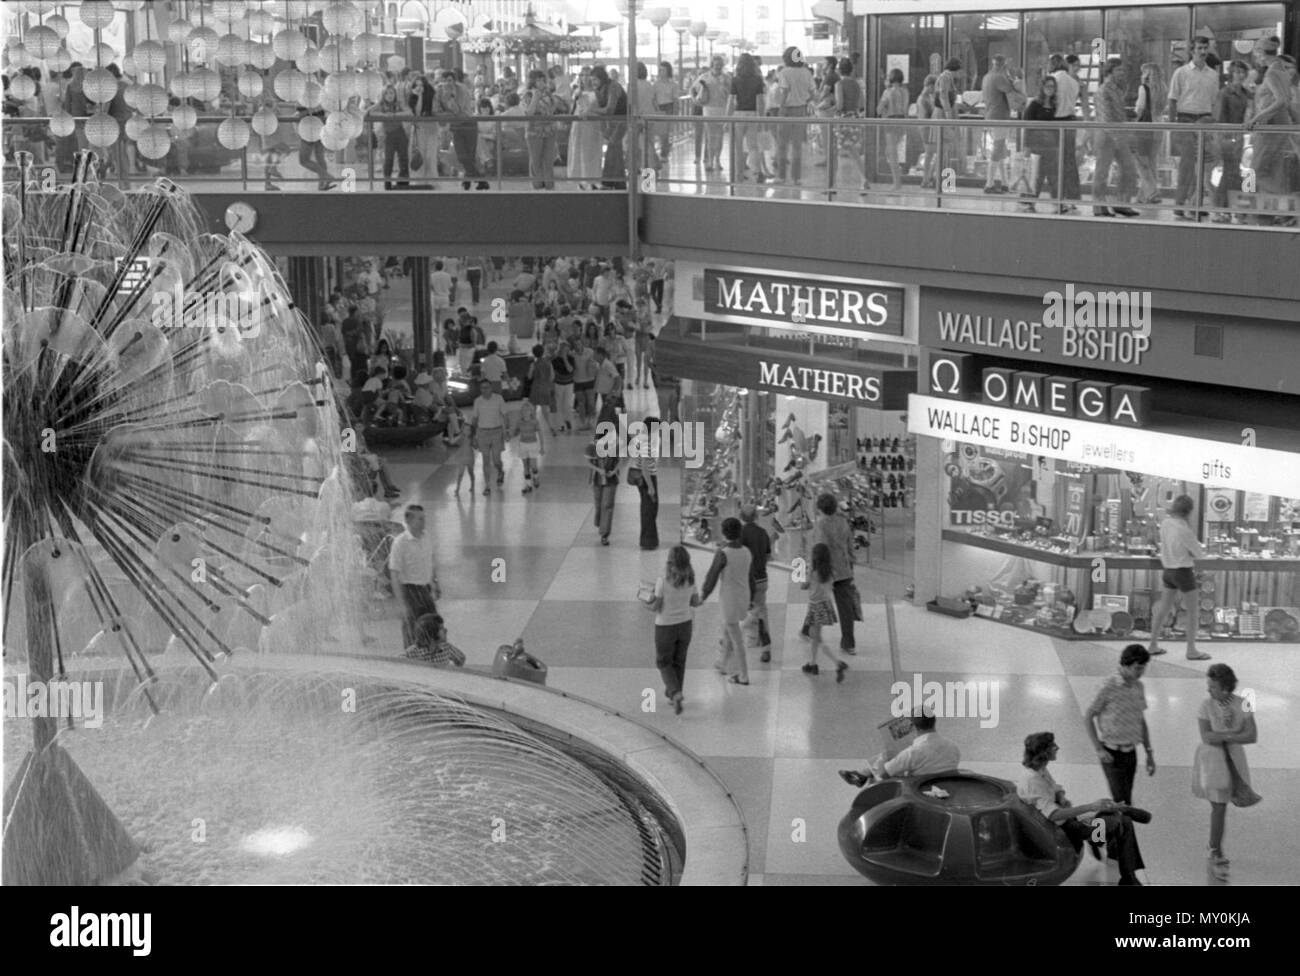 Indooroopilly Shoppingtown, Brisbane, c 1976. Indooroopilly Shoppingtown (now Indooroopilly Shopping Centre) opened in 1970. At its opening, it was reputedly the largest shopping mall in the Southern Hemisphere. Stock Photo